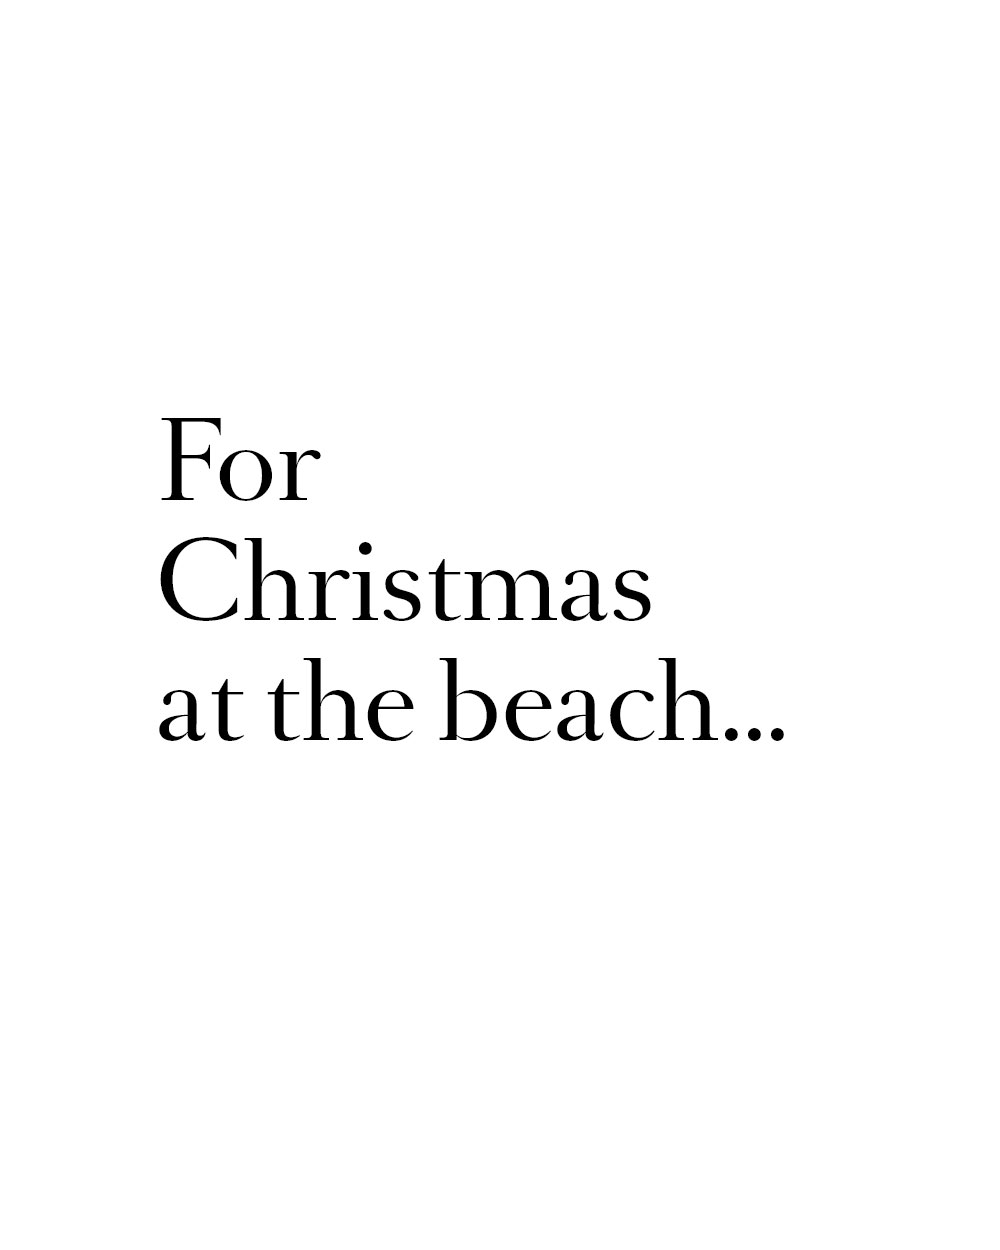 For Christmas at the beach...